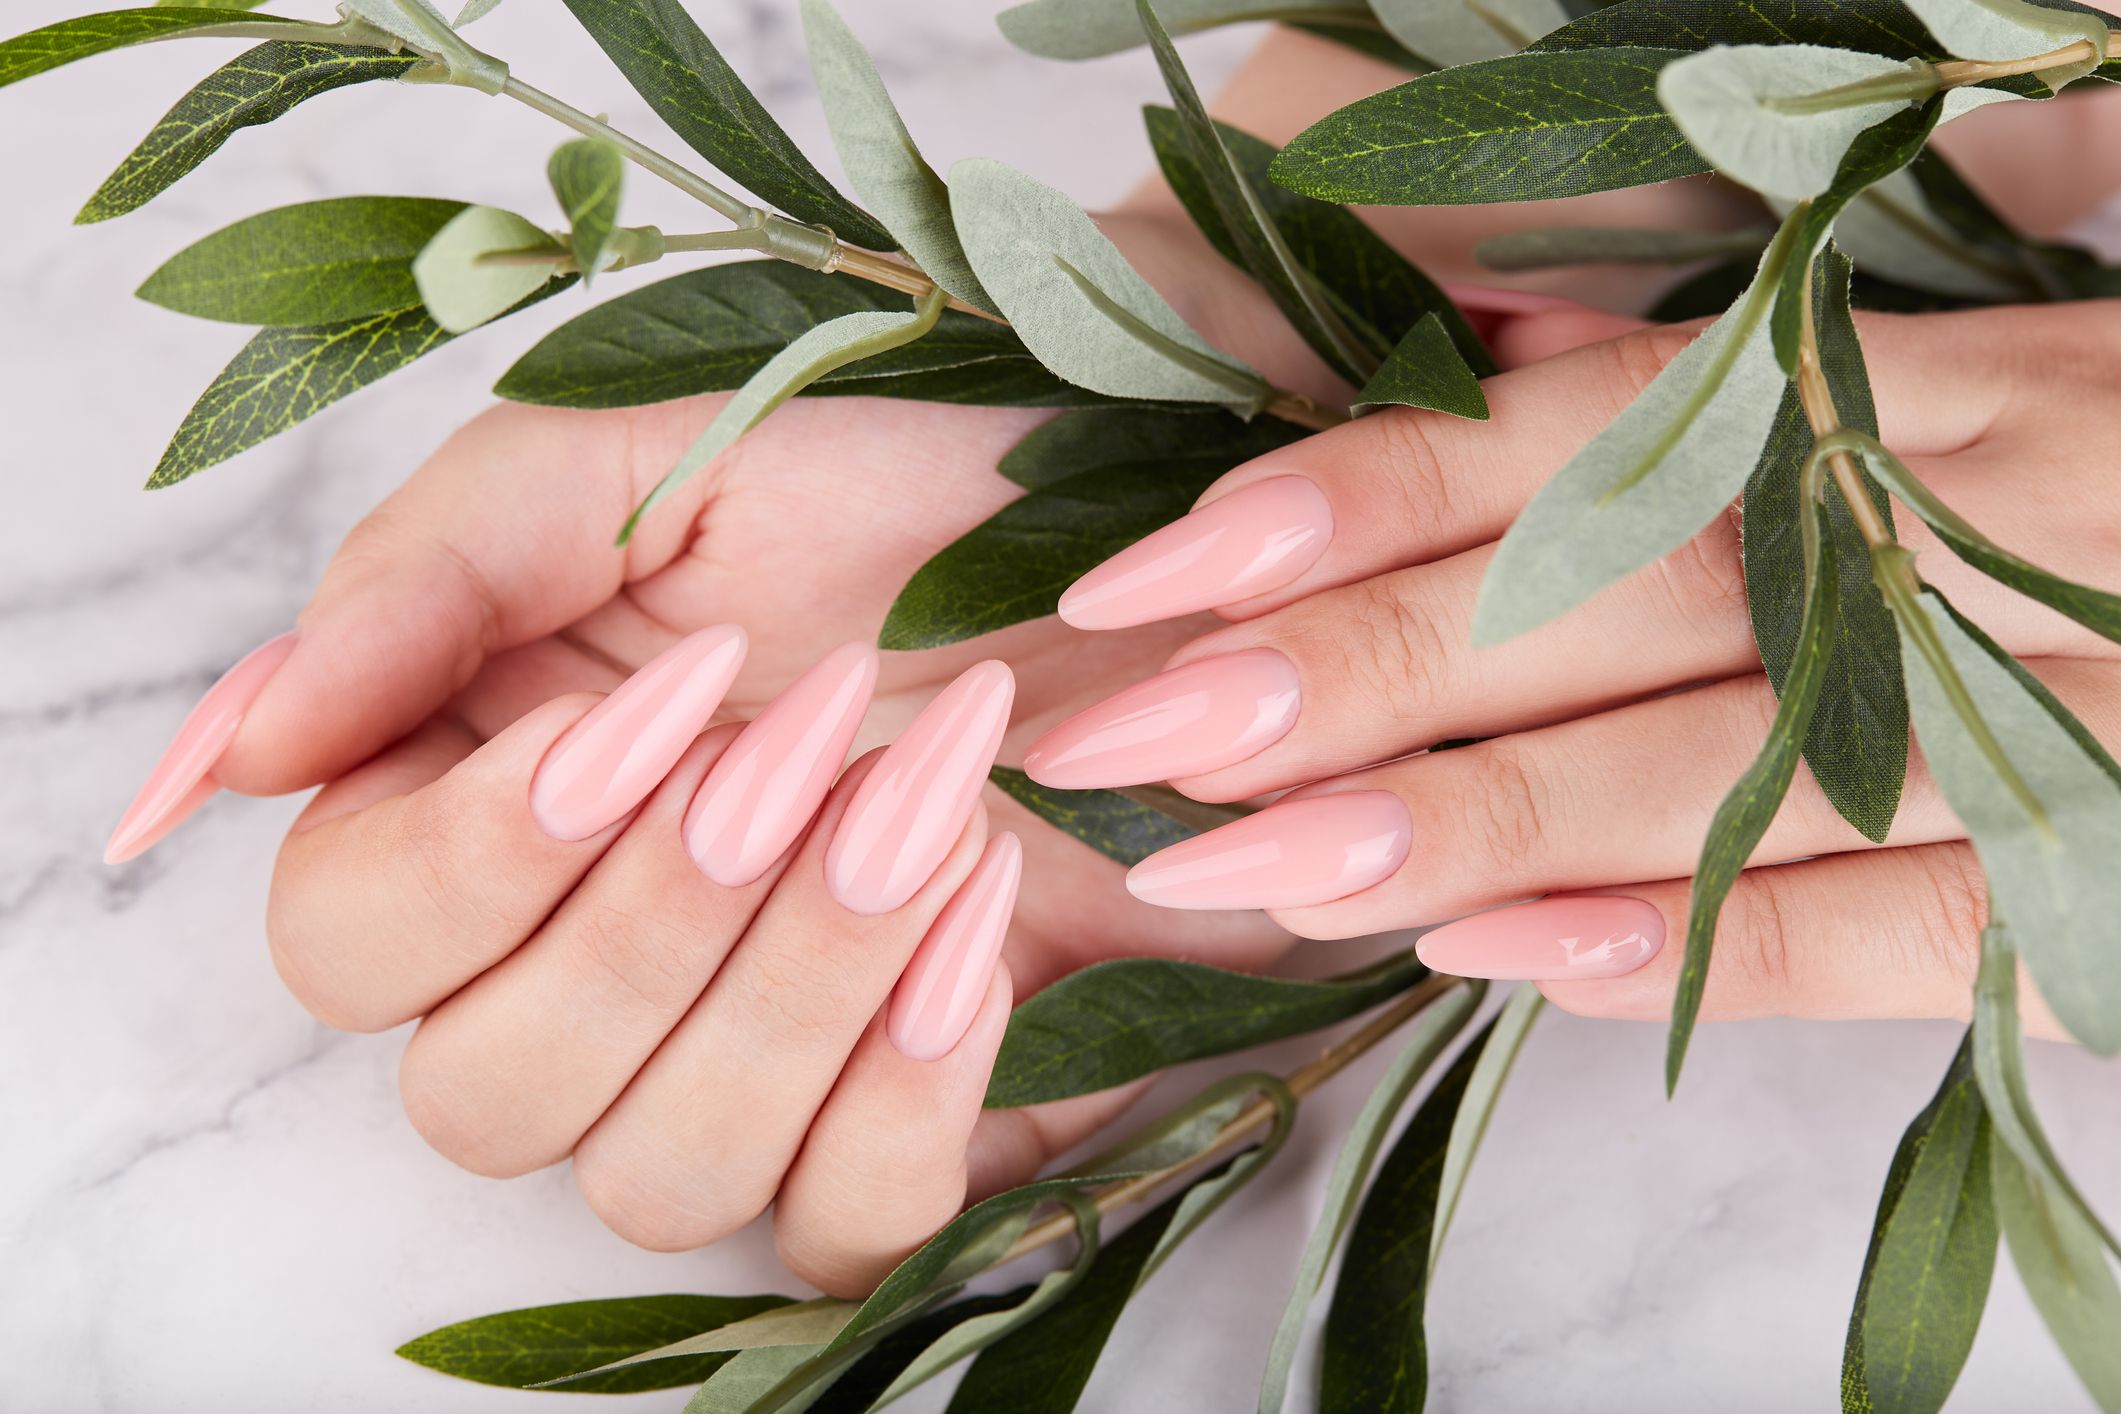 Gel Nails Keep Chipping? Here's 9 Reasons Why - Tropicoco